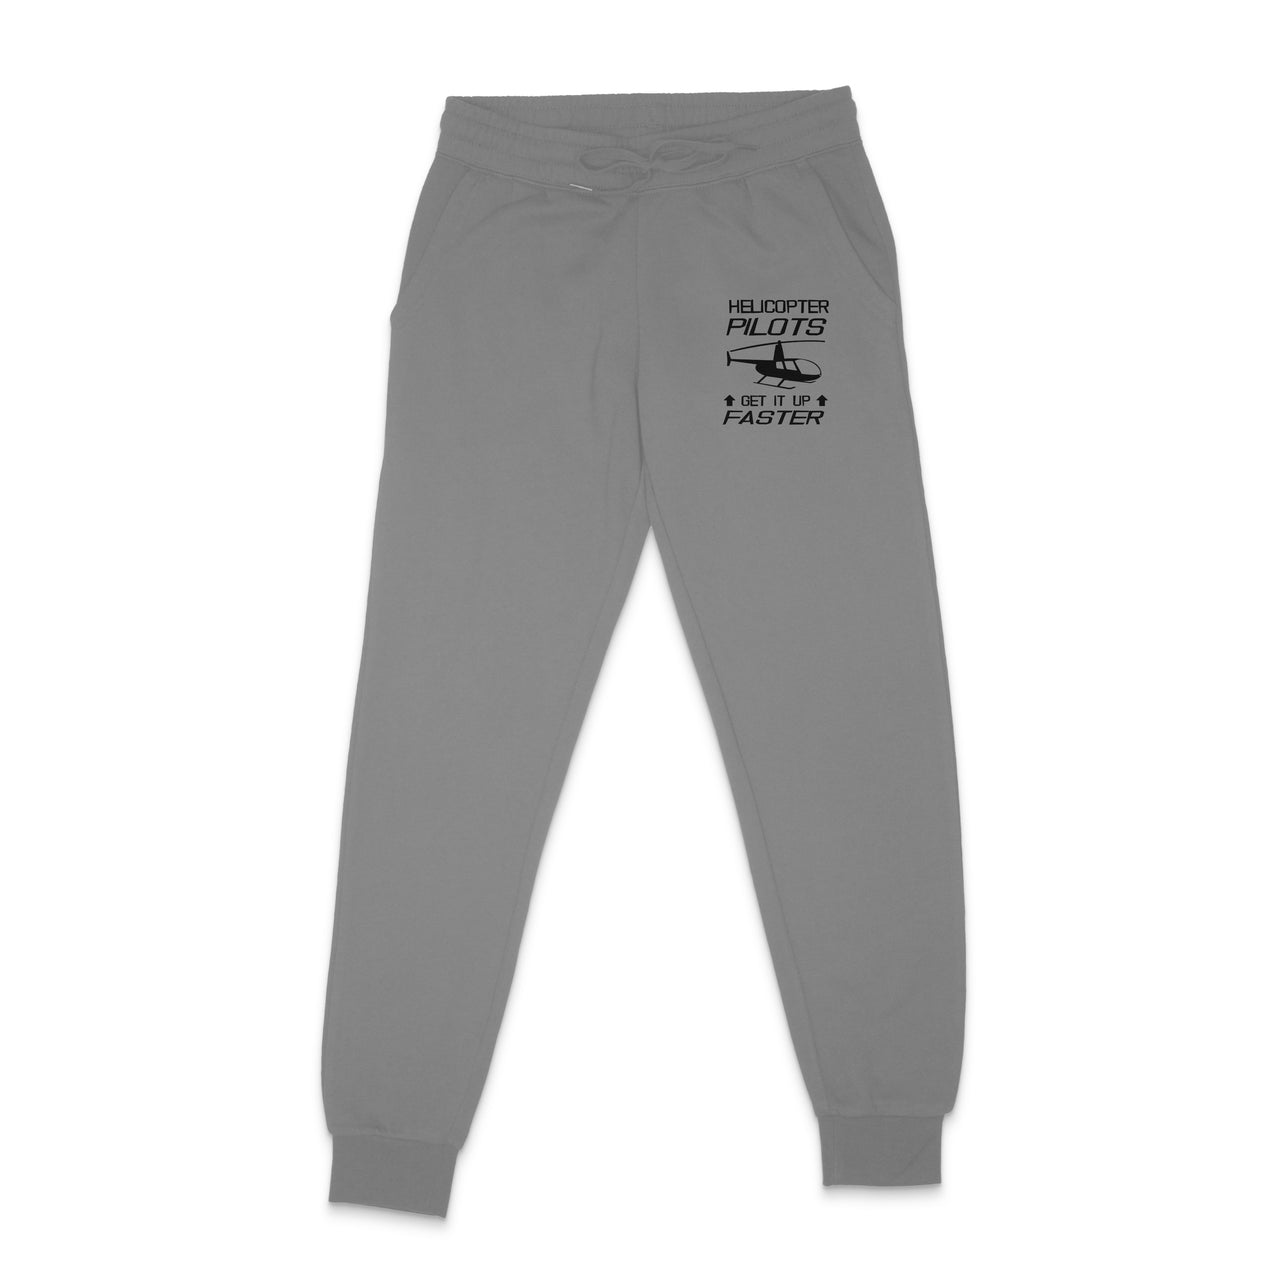 Helicopter Pilots Get It Up Faster Designed Sweatpants